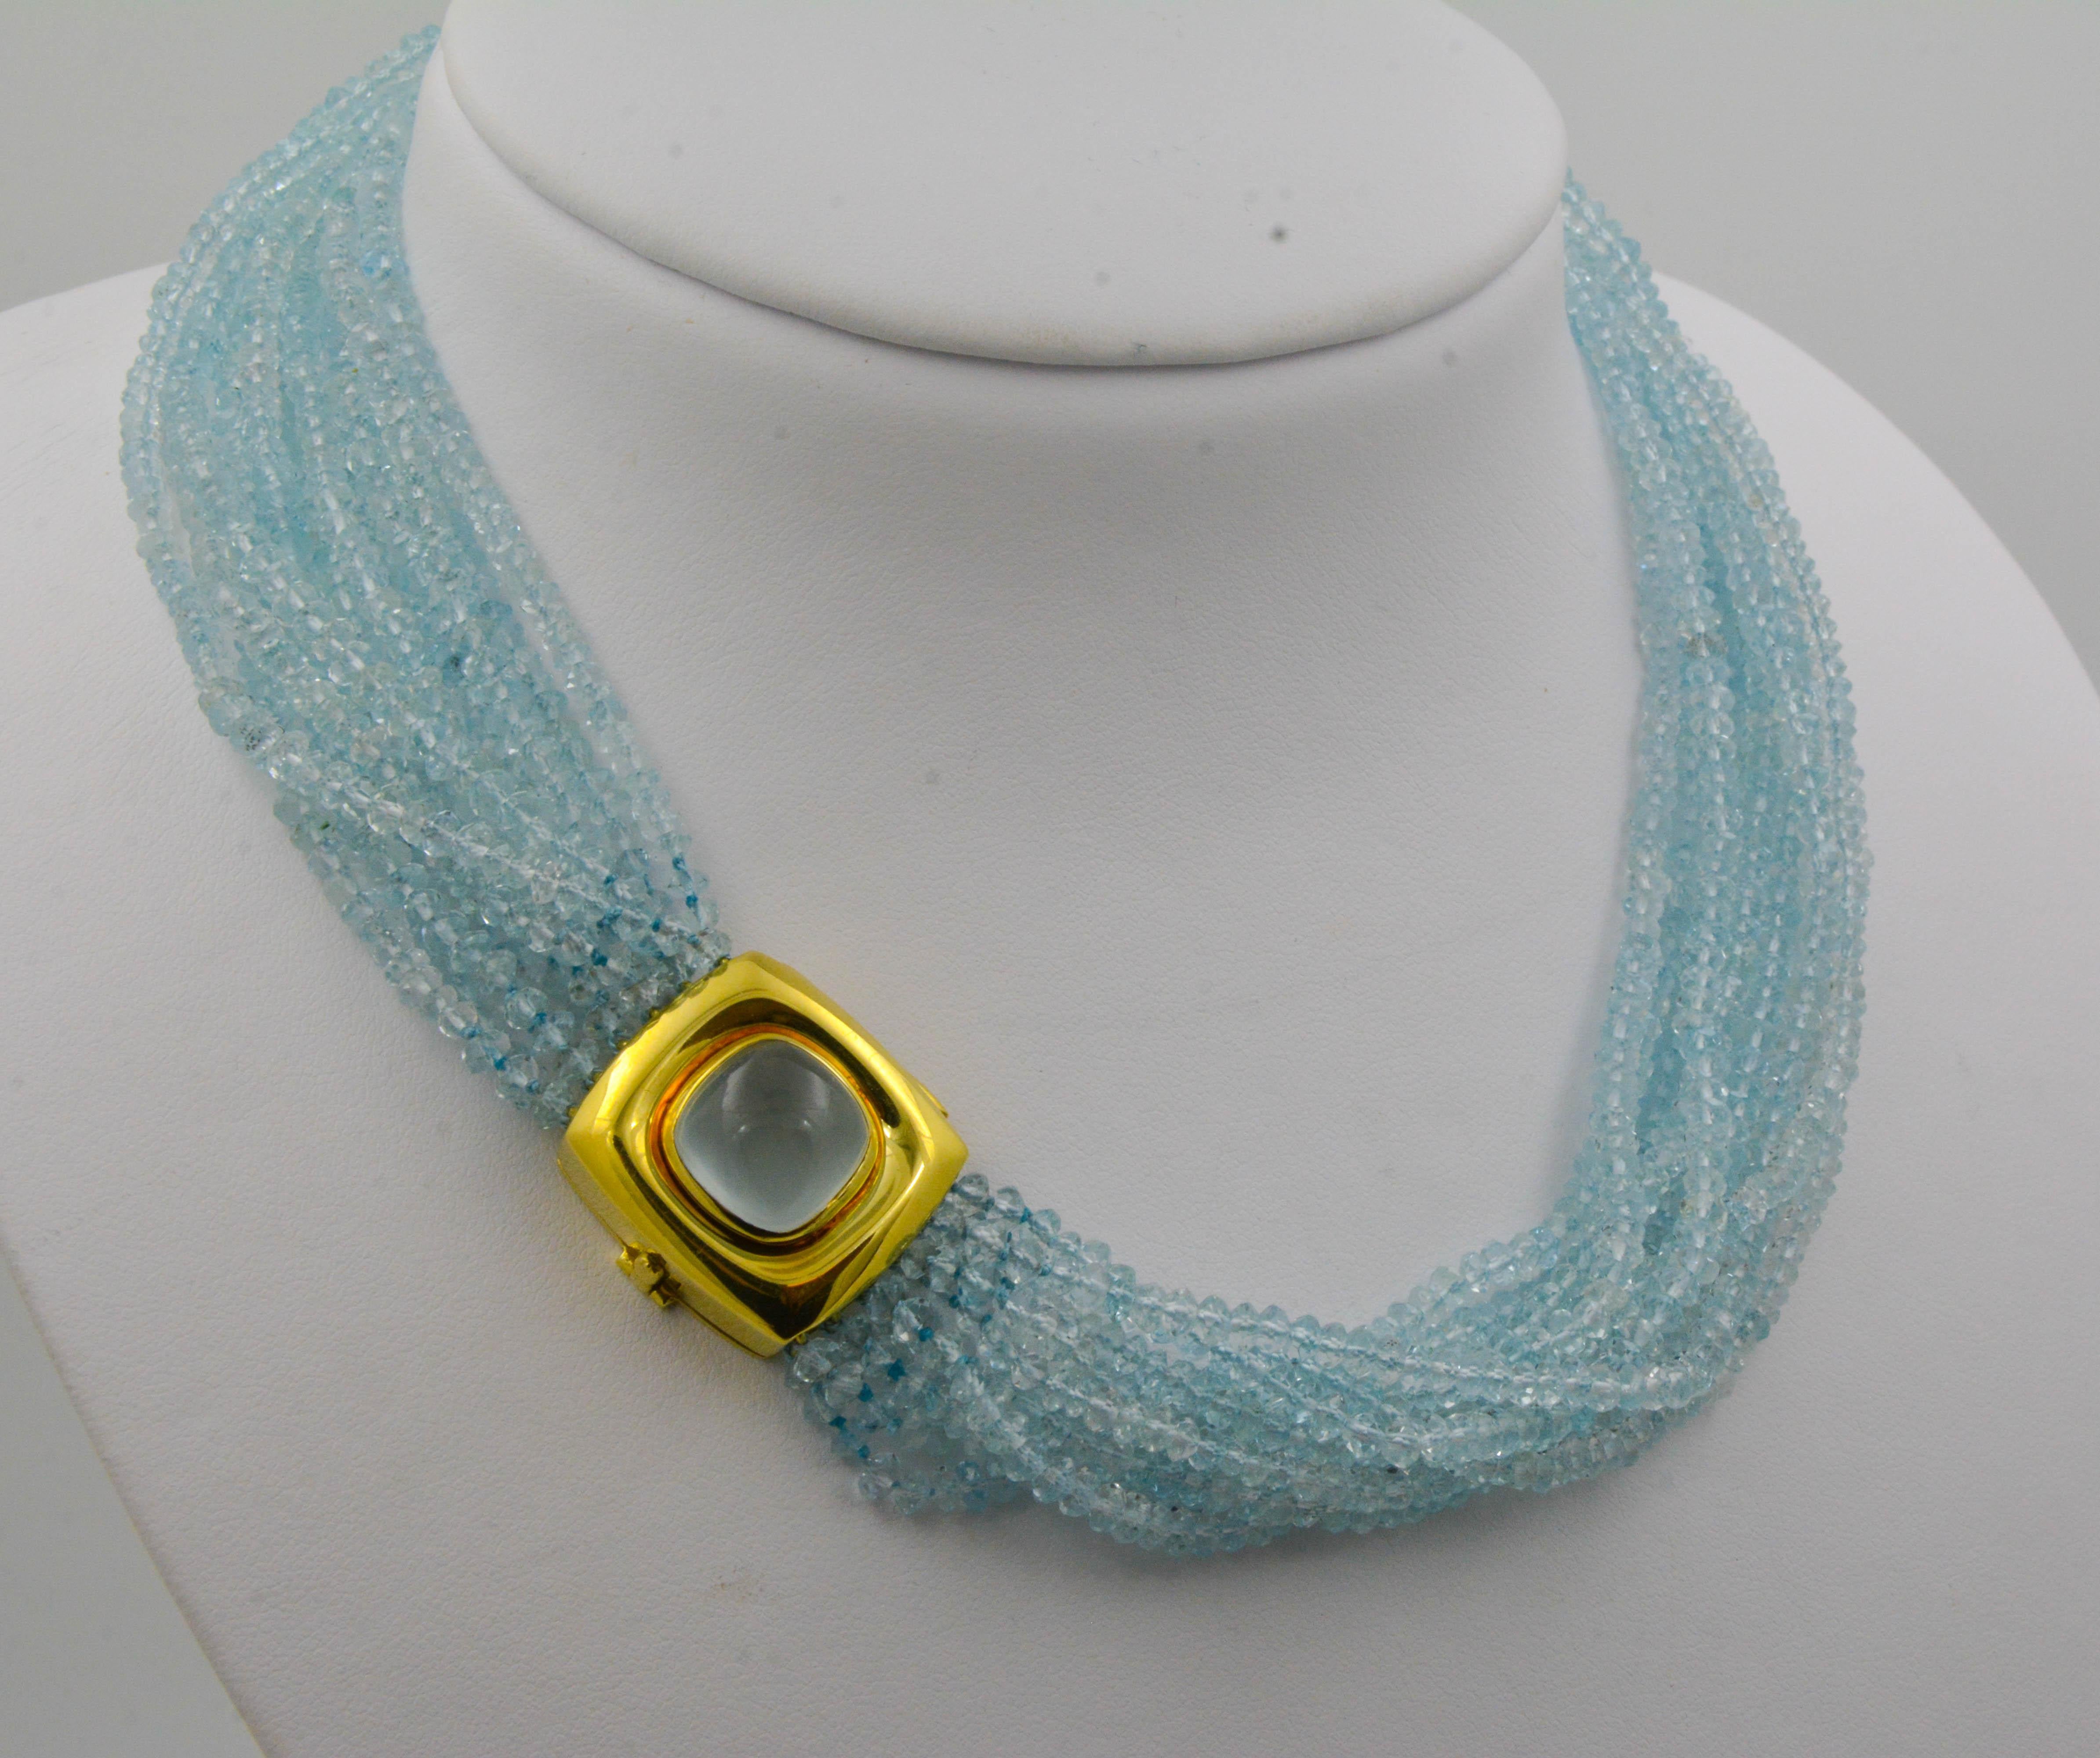 From our Estate collection, comes an original convertible piece from the Mazza Company.  Perfect for the lady born in March, this 18 karat yellow gold beaded Aquamarine bracelet & necklace can be worn individually or strung together to create a long